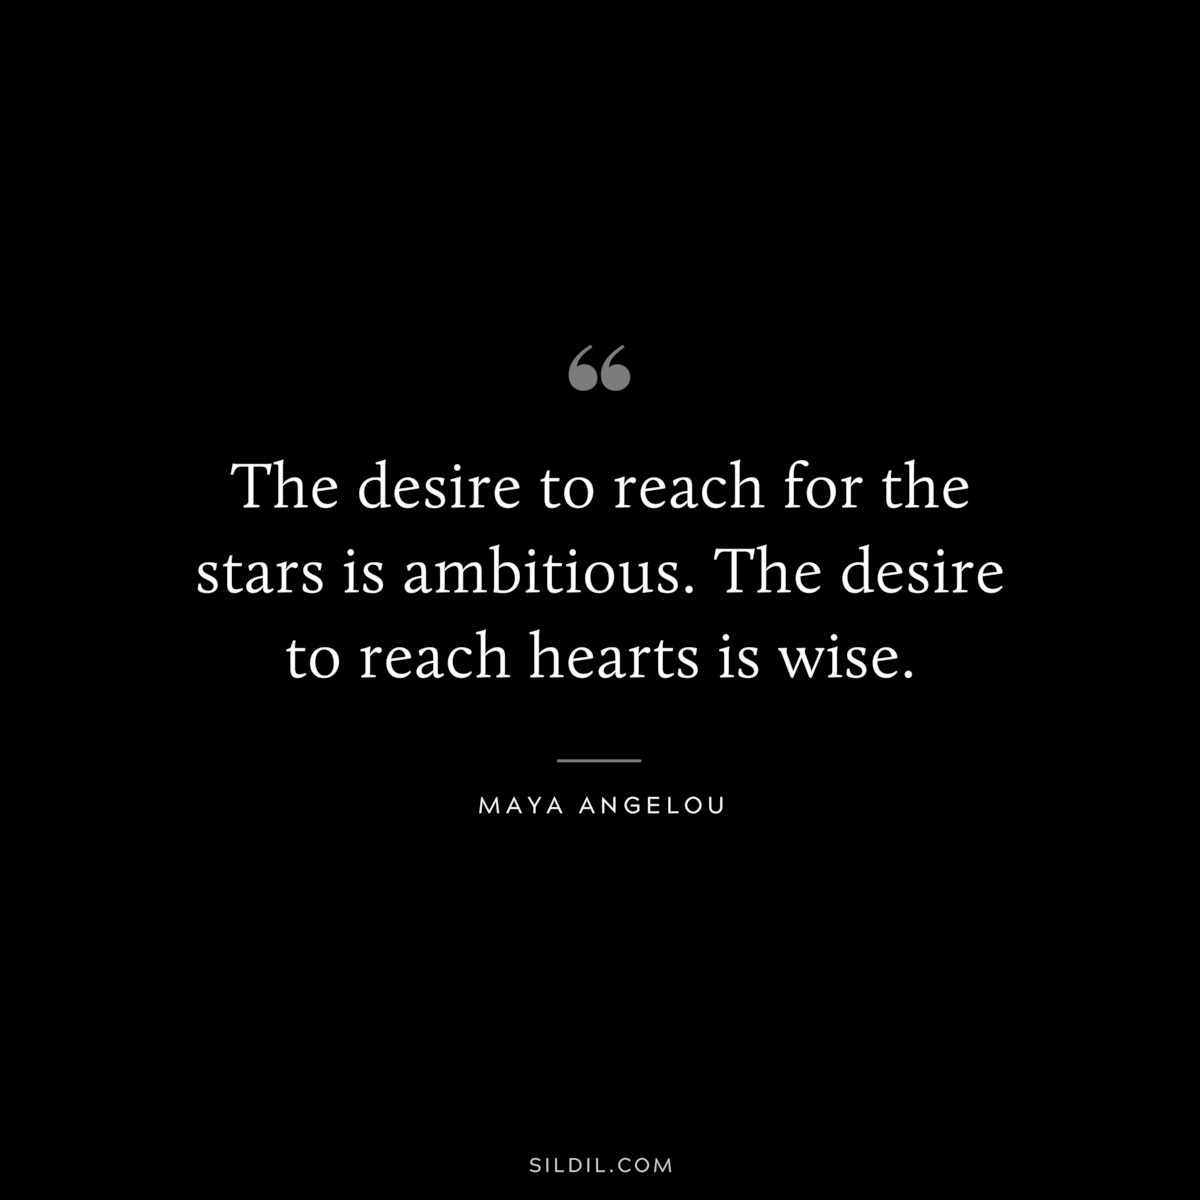 The desire to reach for the stars is ambitious. The desire to reach hearts is wise. ― Maya Angelou